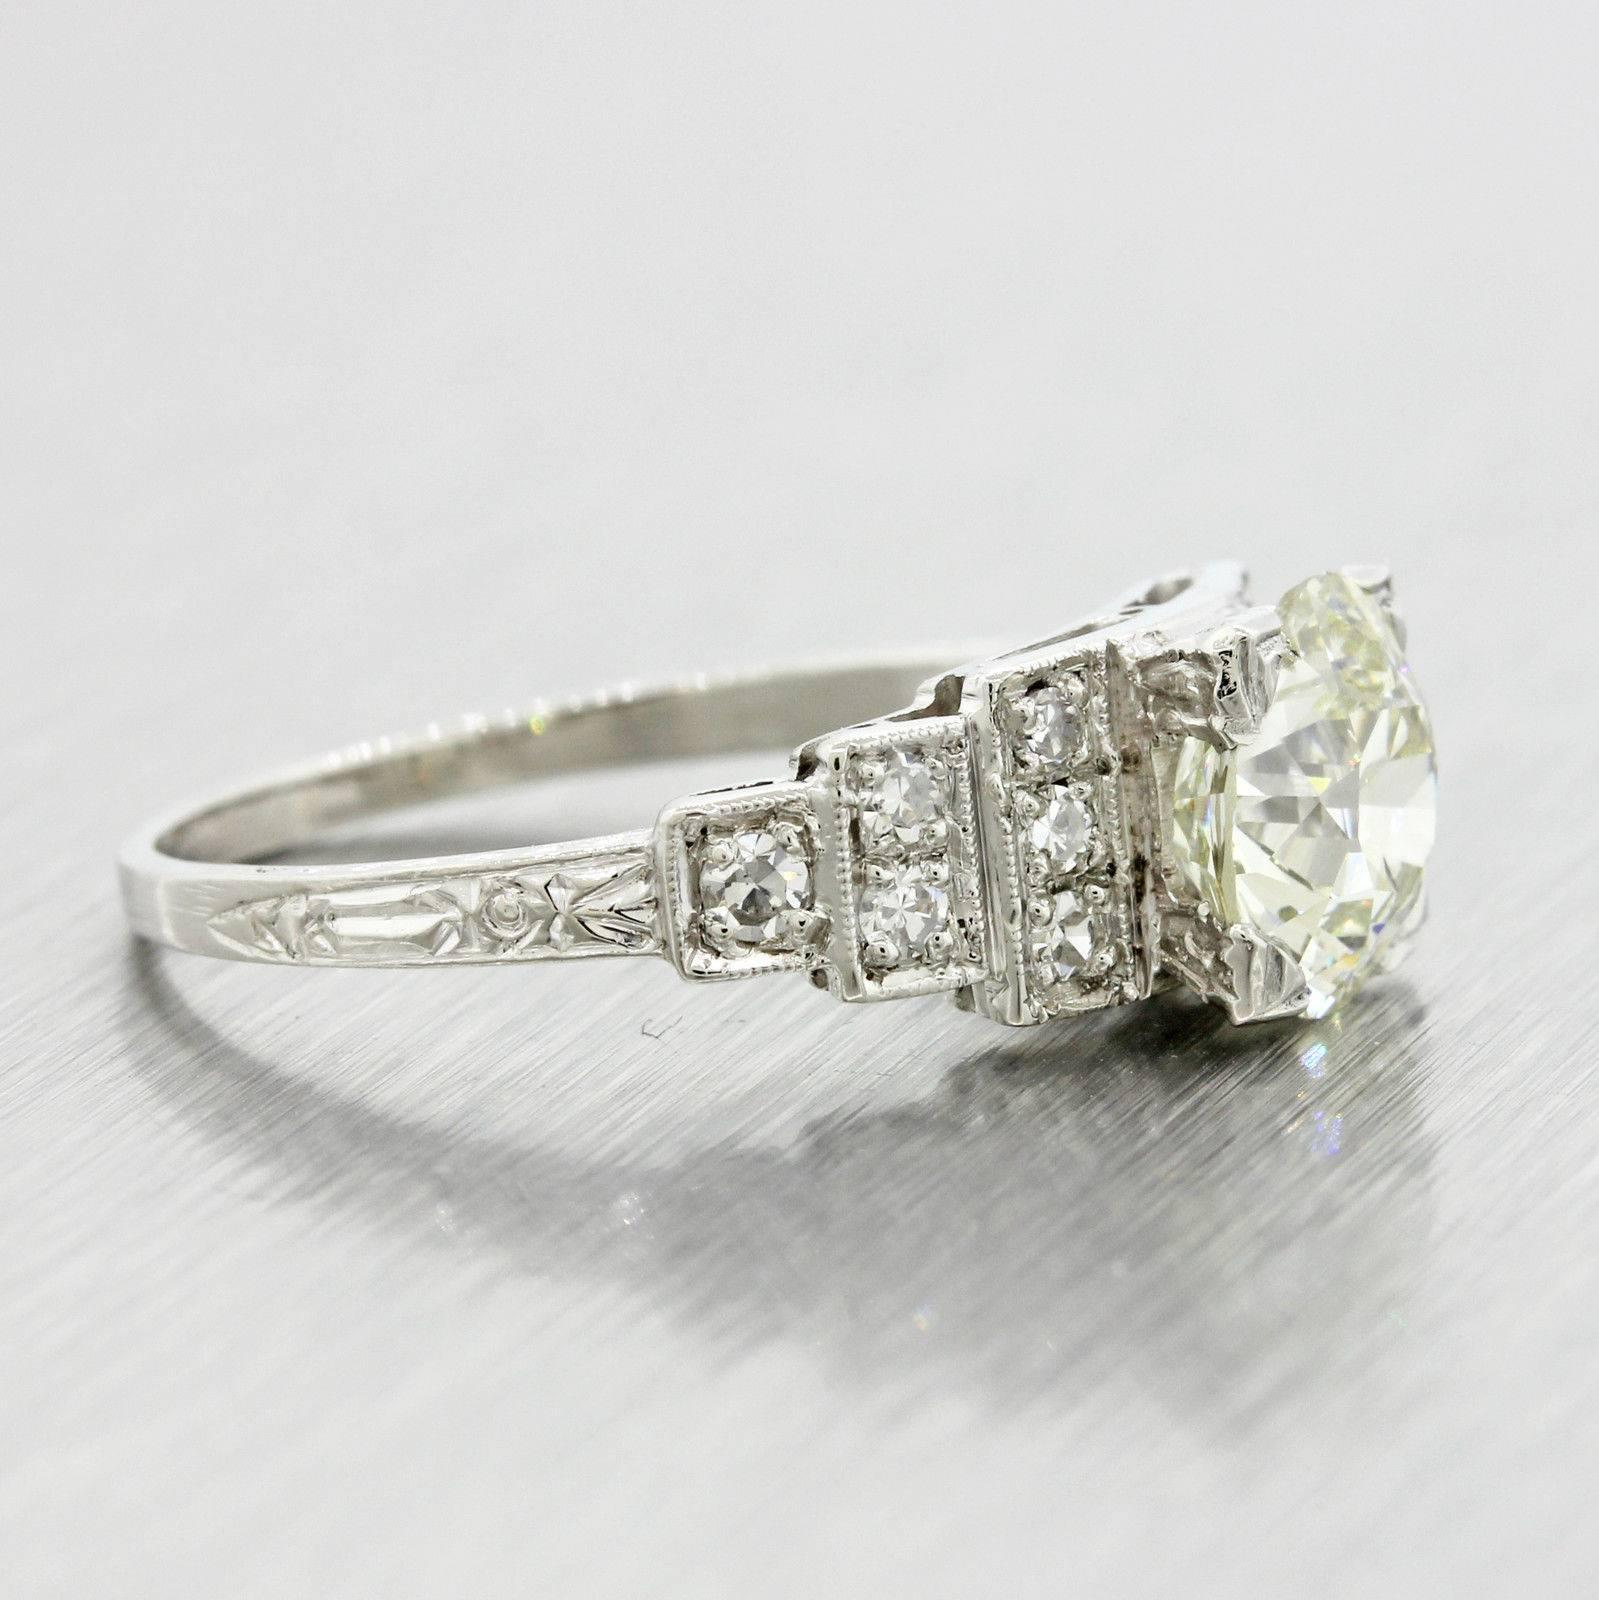 This is a beautiful Antique Art Deco diamond engagement ring that can be dated back to the 1920s. This rings diamond grades and estimated retail price of $15,000.00 USD was determined by world-renowned EGL USA; one of the most reputable diamond